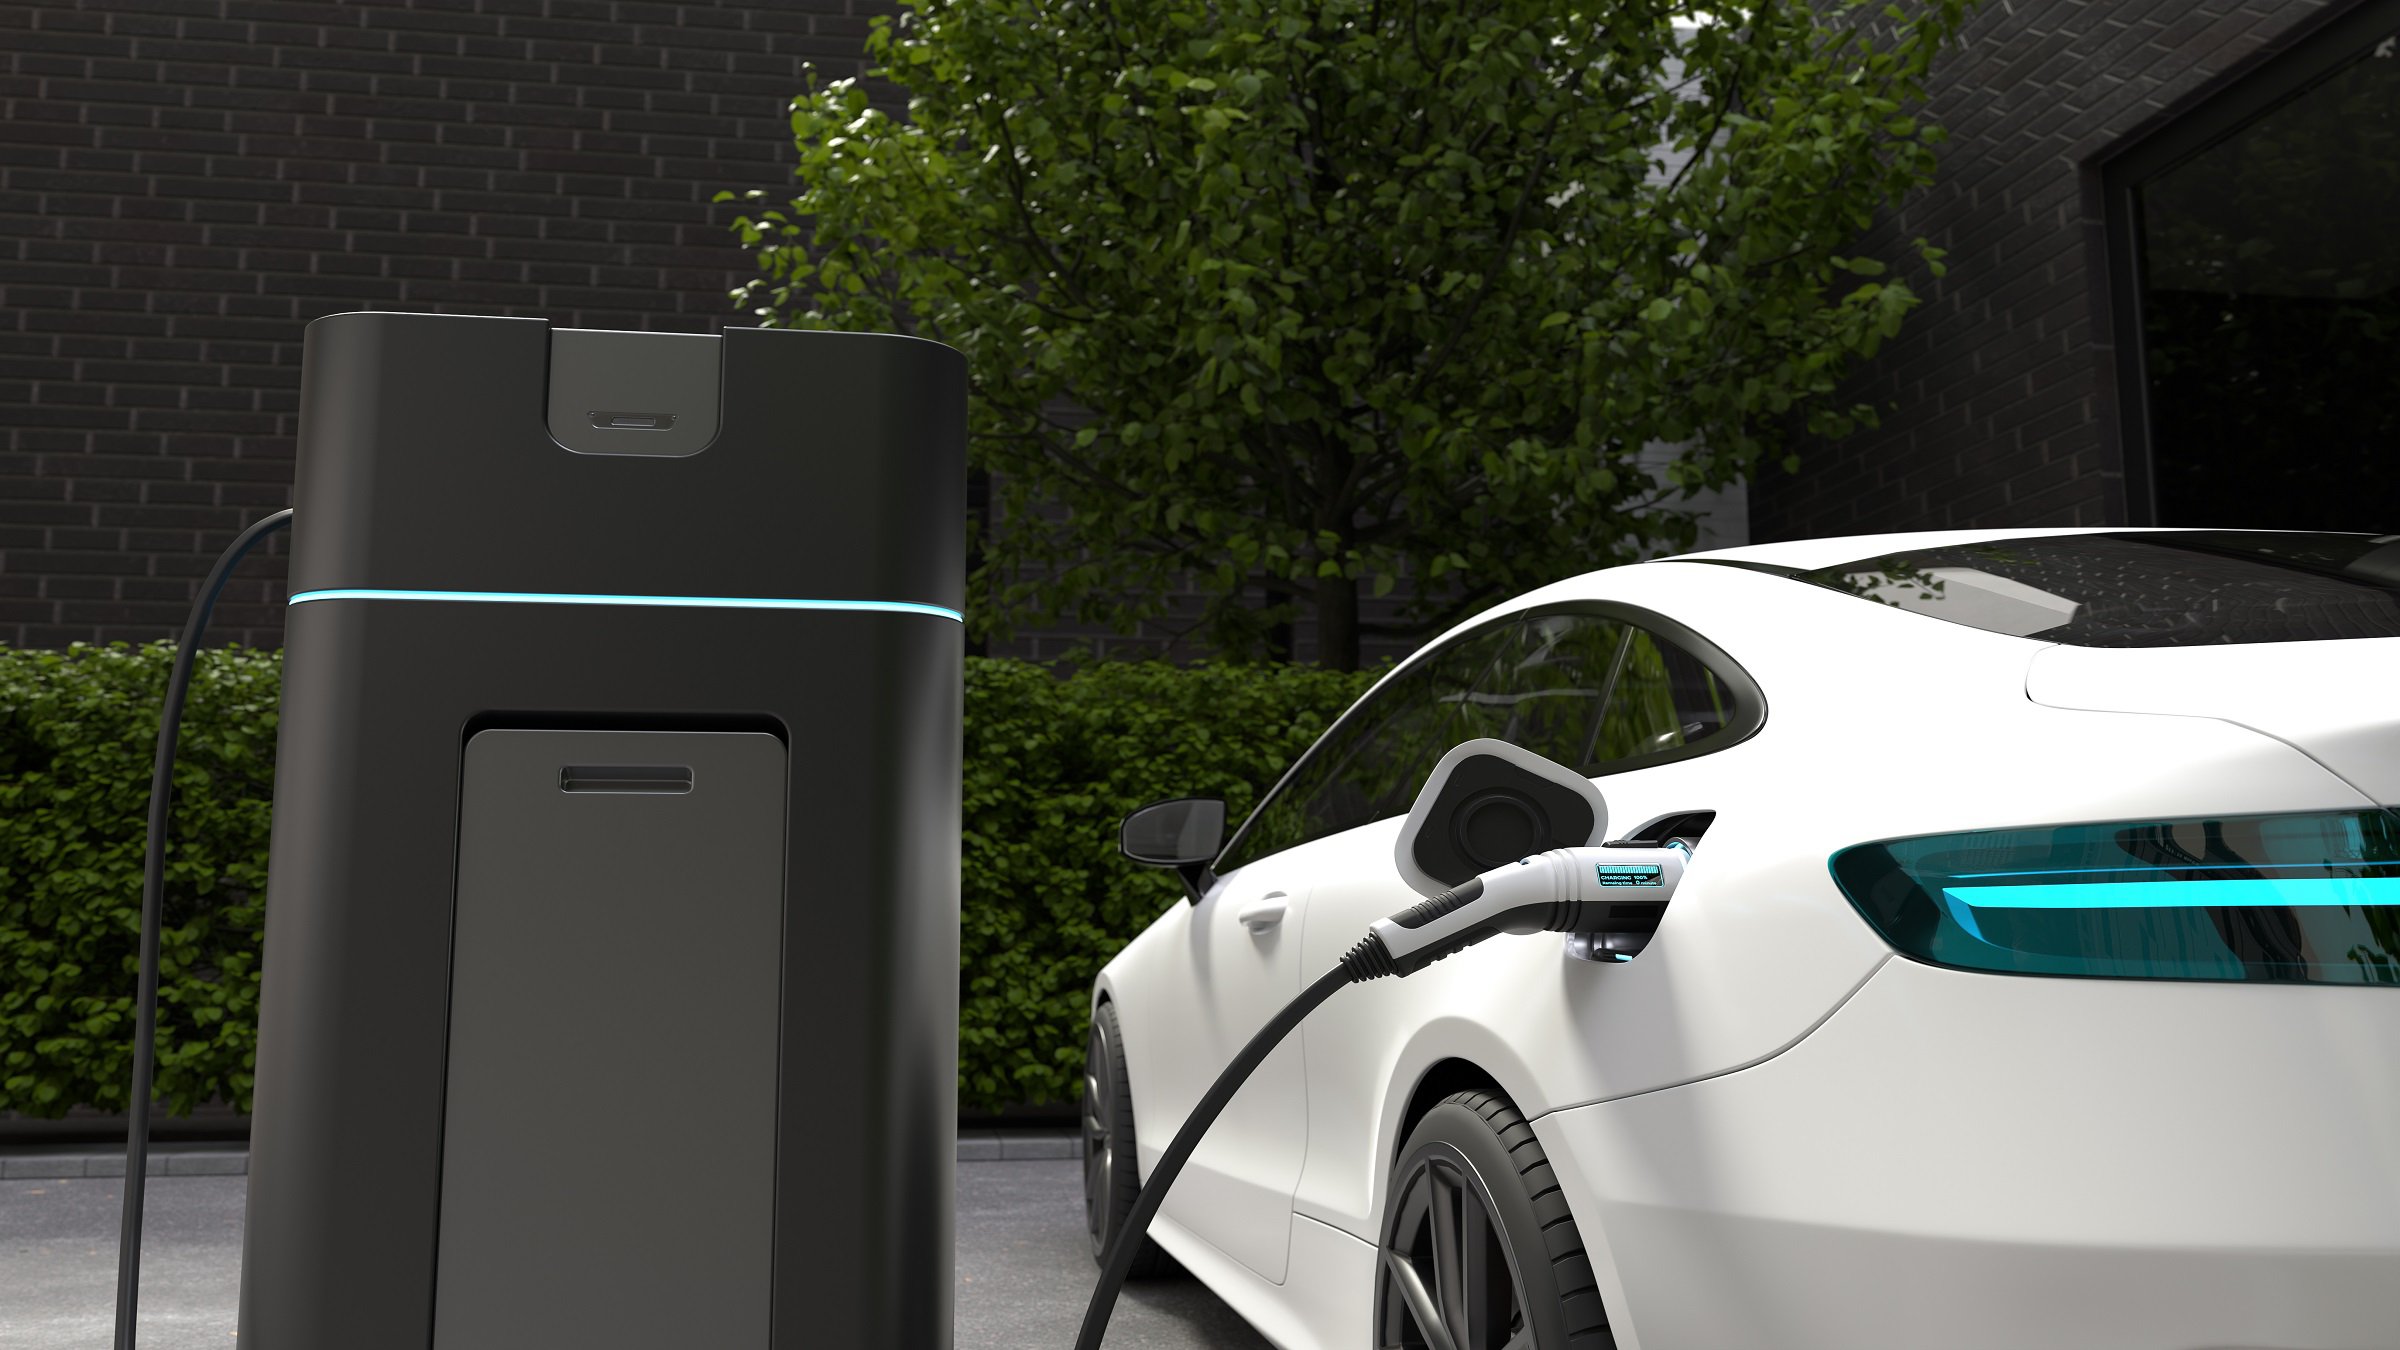 Electric car charging at home, Clean energy filling technology. 3D illustration